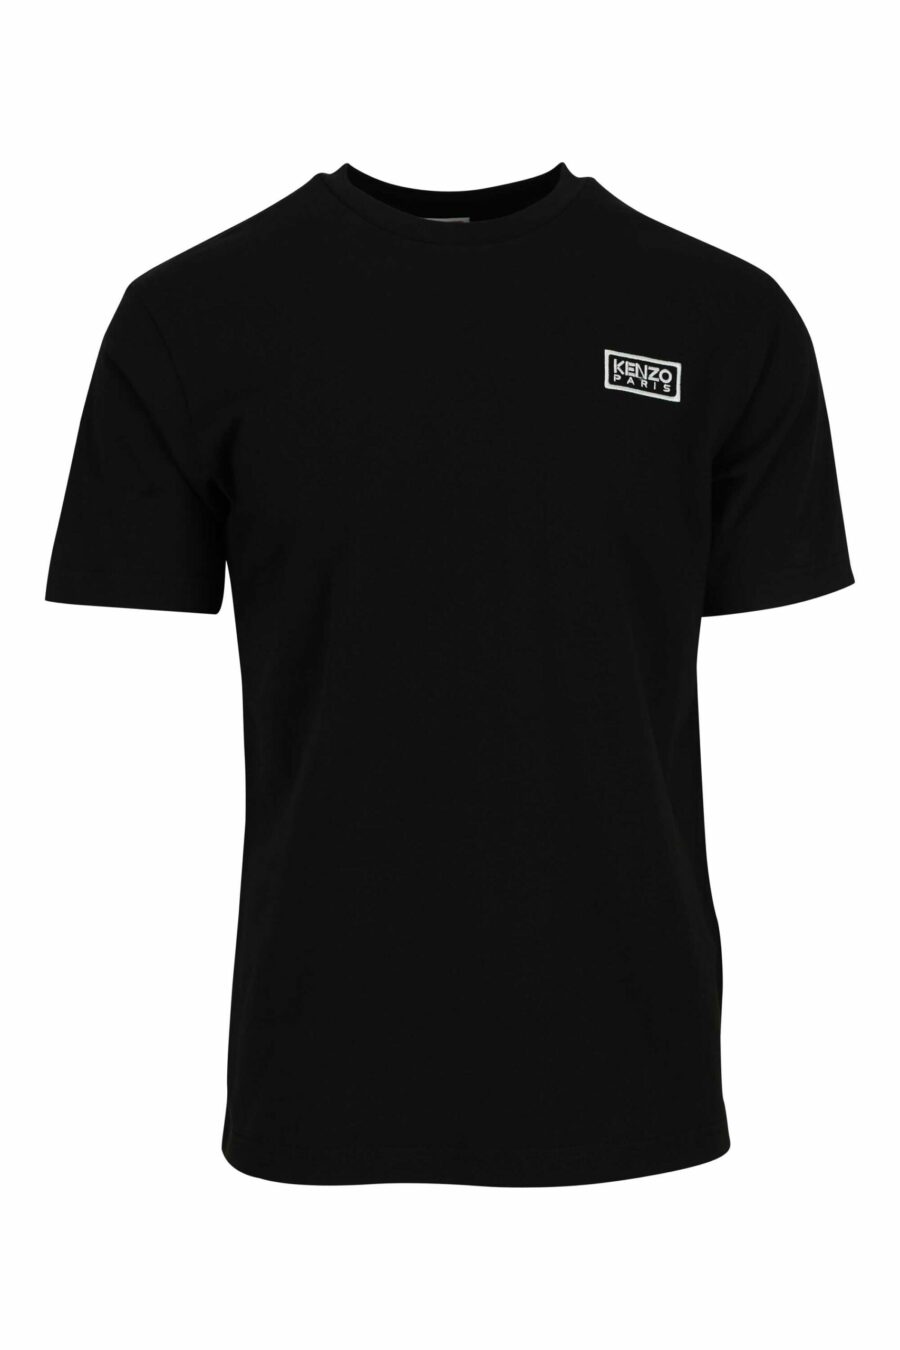 Black T-shirt with minilogue "KP classic" - 3612230624443 scaled